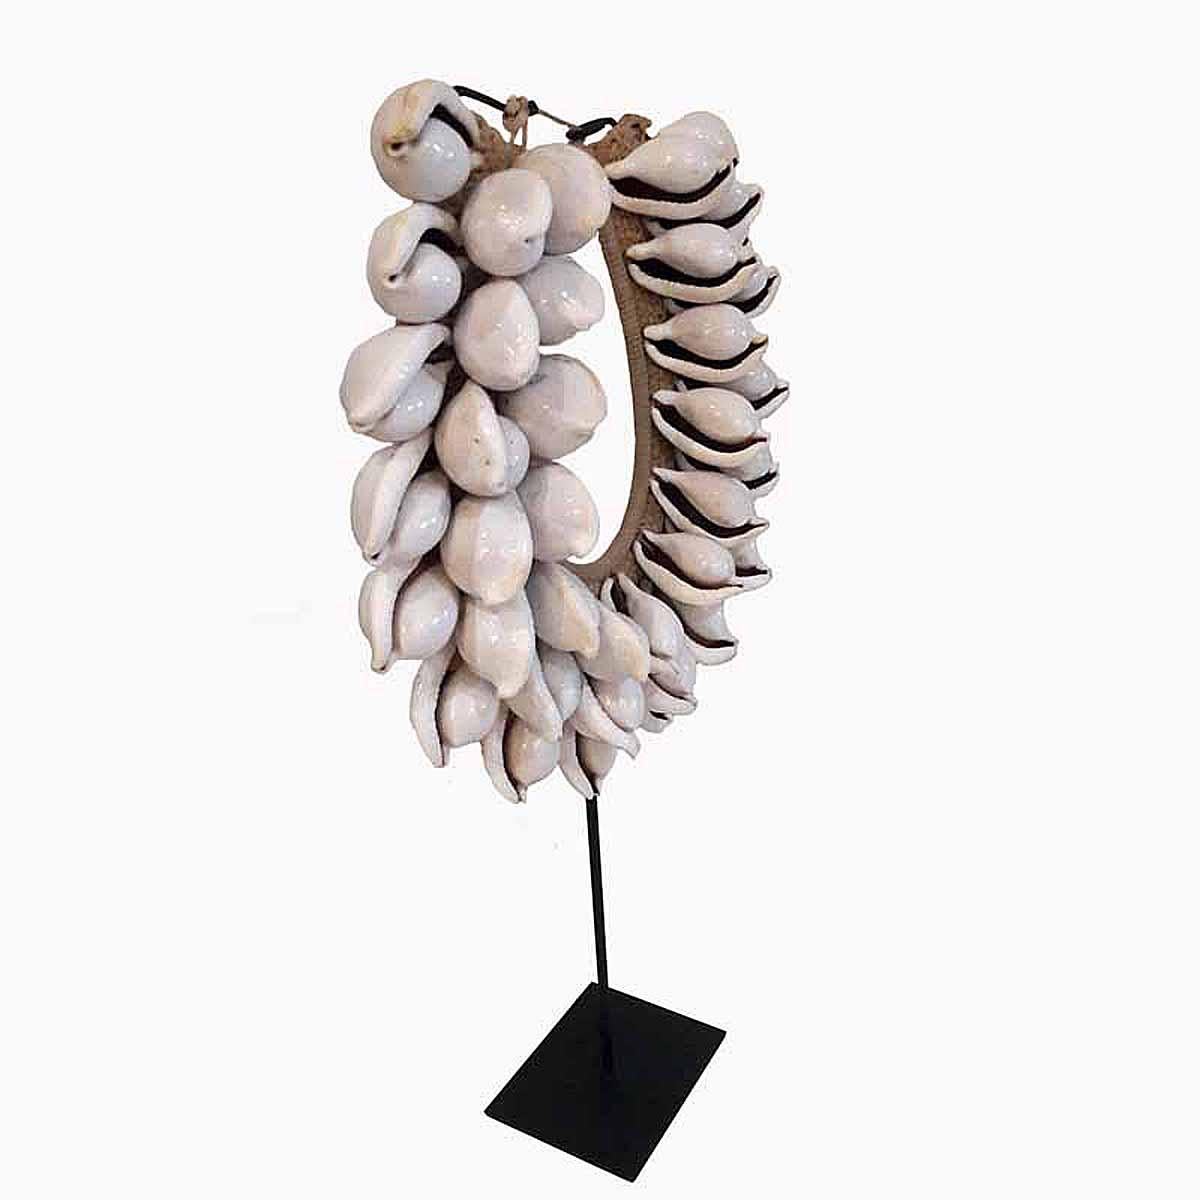 A decorative necklace from Bali, Indonesia, on a black metal stand. The large, white cowry shells are delicately attached to a handwoven cotton / raffia base. Mounted on a black metal stand.